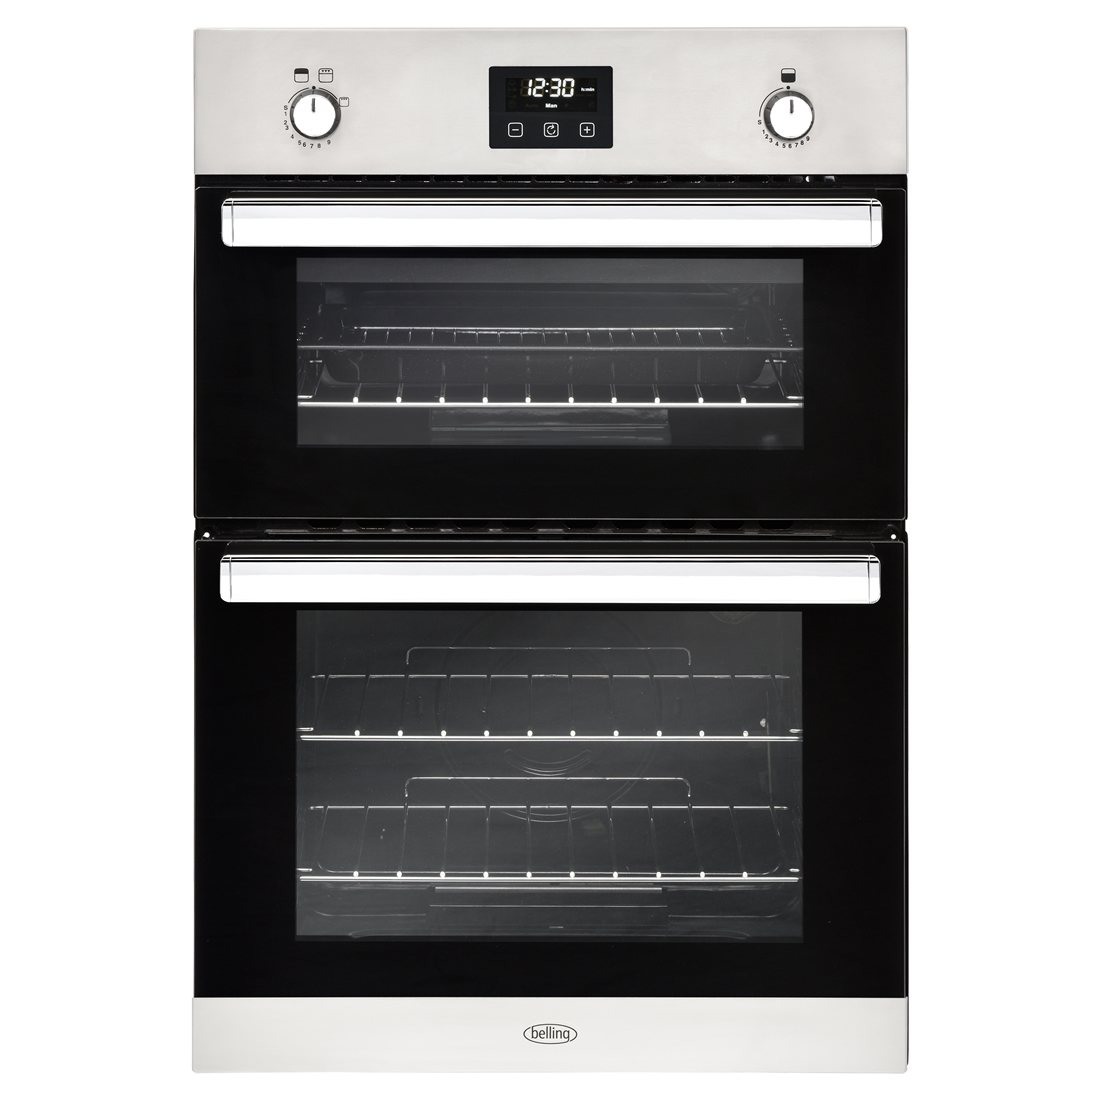 Belling Built-in Double Gas Oven Slow Cook Stainless Steel